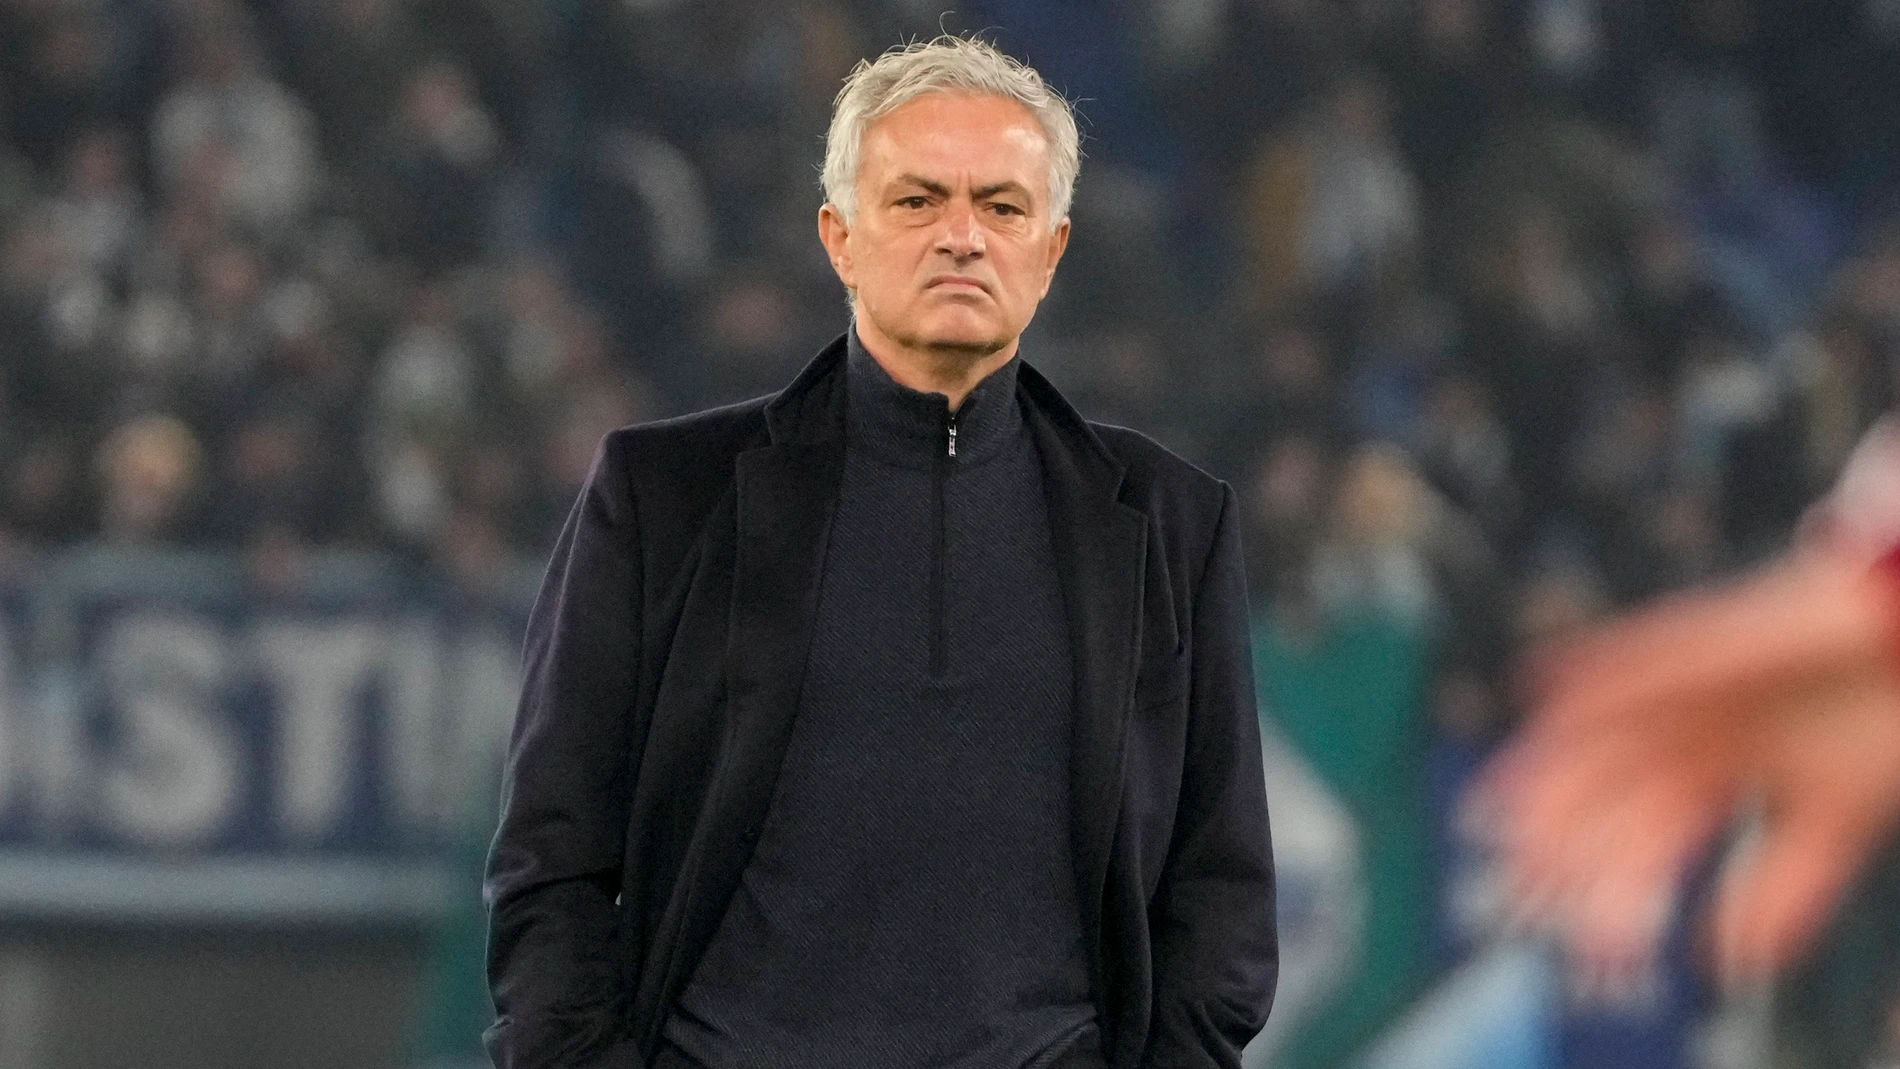 FILE - Roma's head coach Jose Mourinho stands on the pitch during his team's warm up ahead of the quarterfinal Italian Cup soccer match between Lazio and Roma at Rome's Olympic Stadium, Wednesday, Jan. 10, 2024. Roma has announced on Tuesday, Jan. 16, 2024 that José Mourinho is leaving the club “with immediate effect.” (AP Photo/Gregorio Borgia, File)